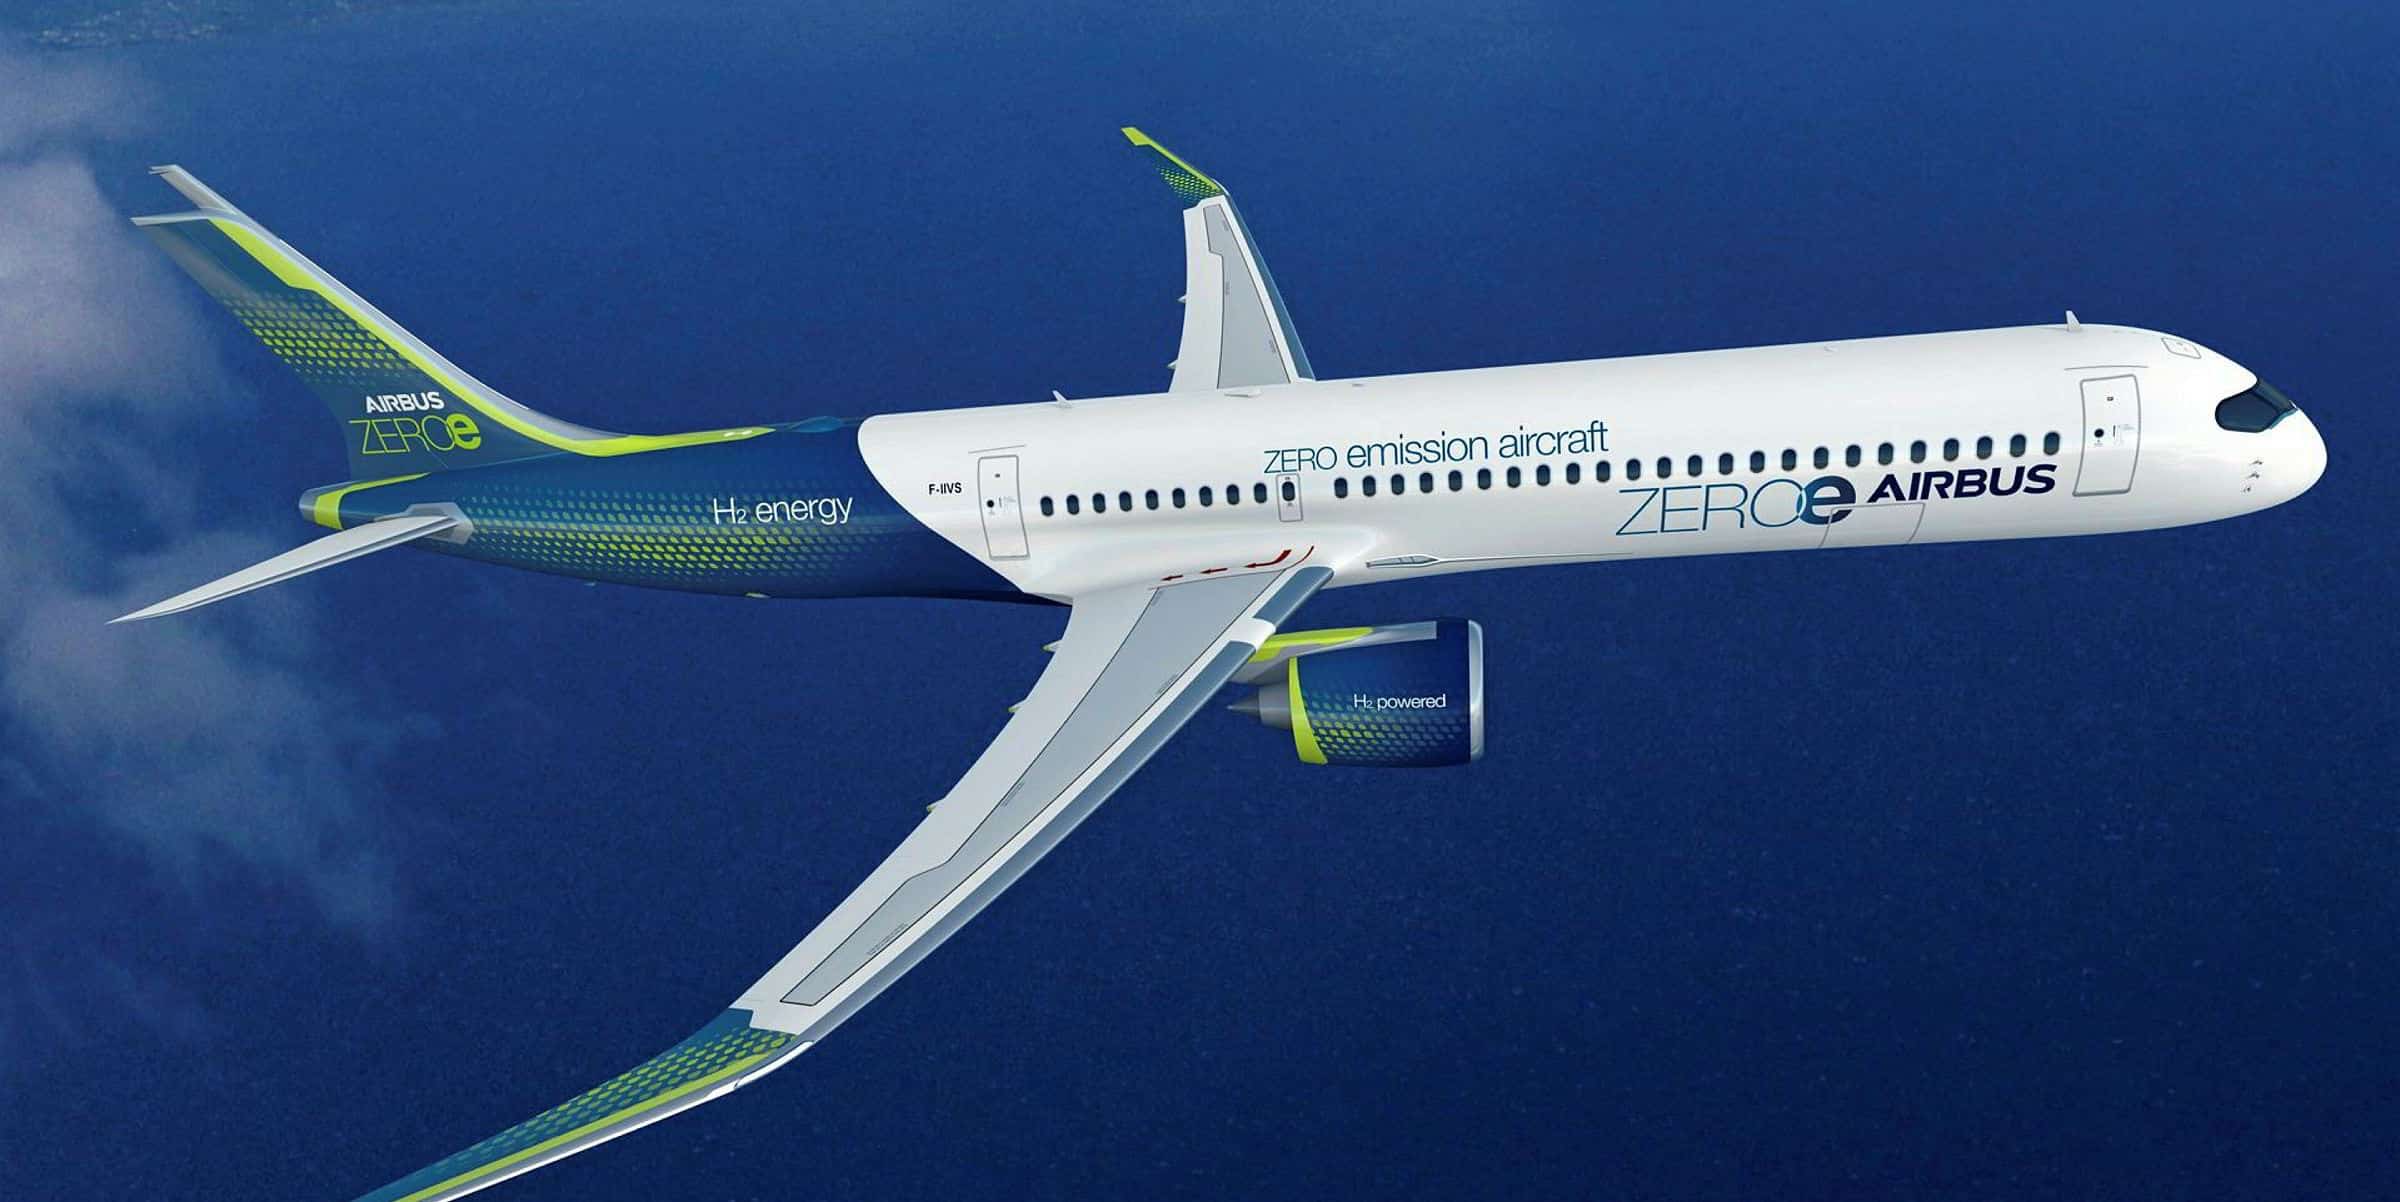 Airbus Wants To Manufacture A Hydrogen-Powered Passenger Aircraft